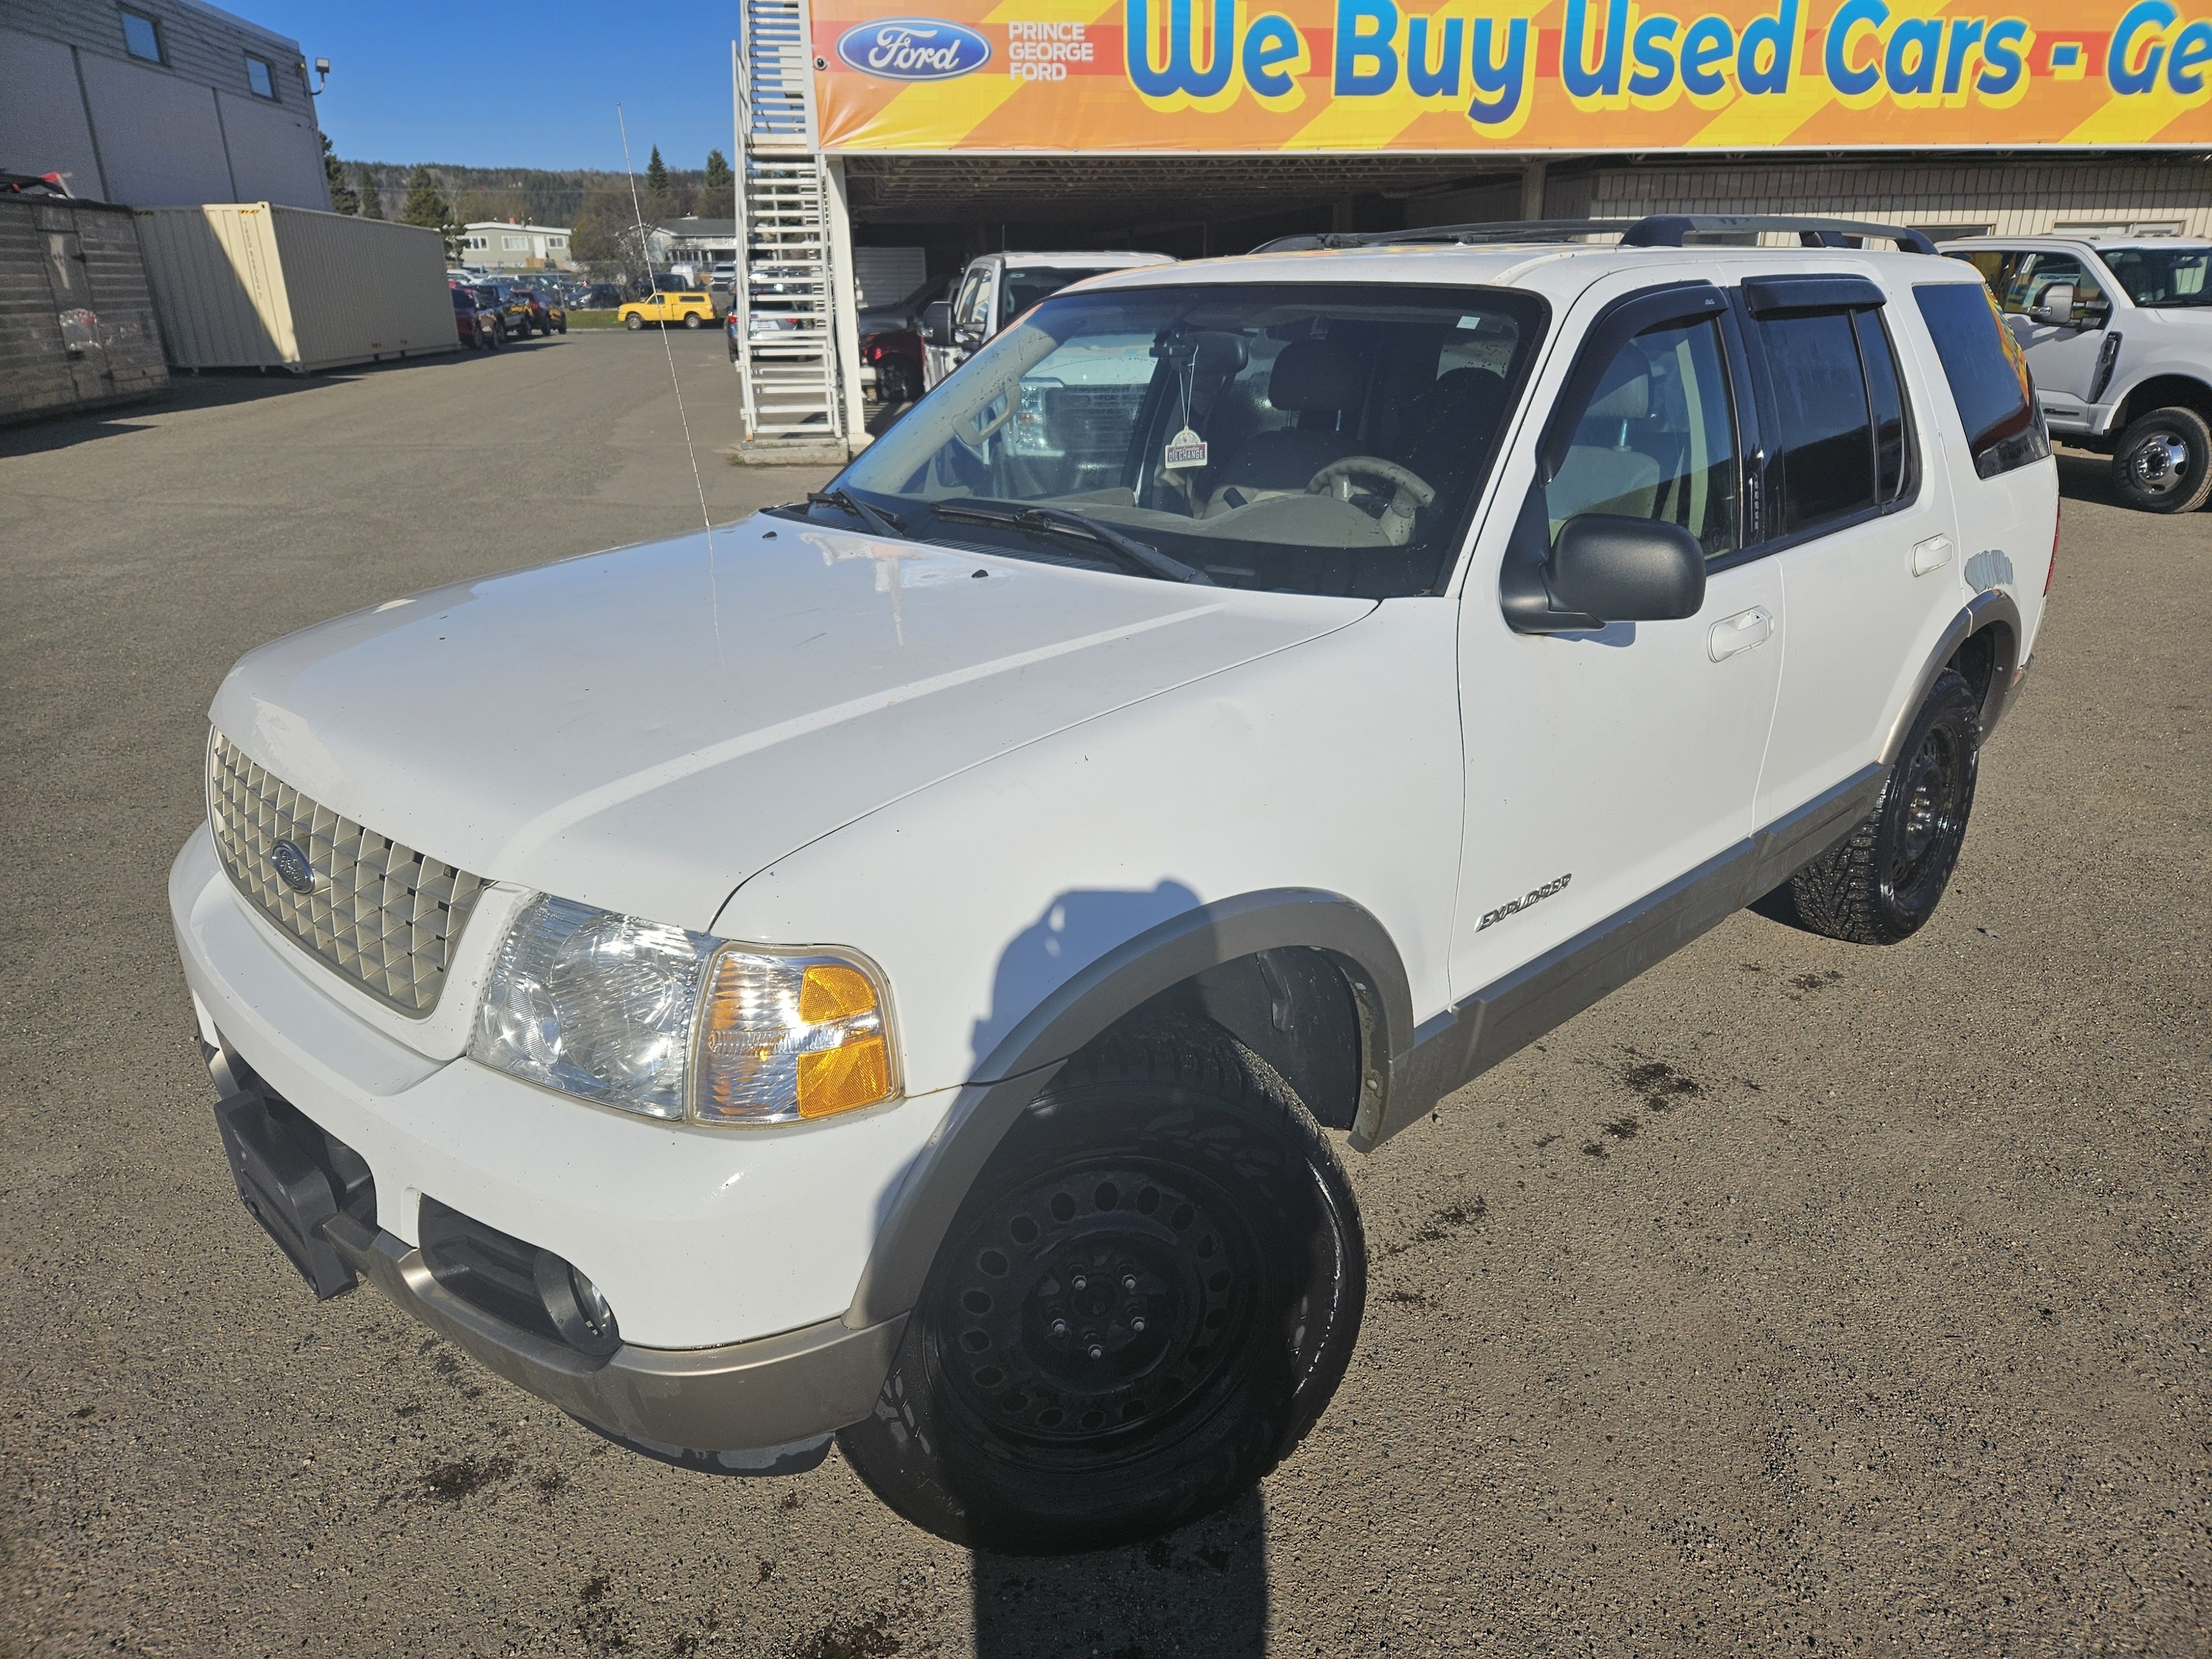 2004 Ford Explorer Eddie Bauer | 4WD | Tow Off The Lot | Block Heater